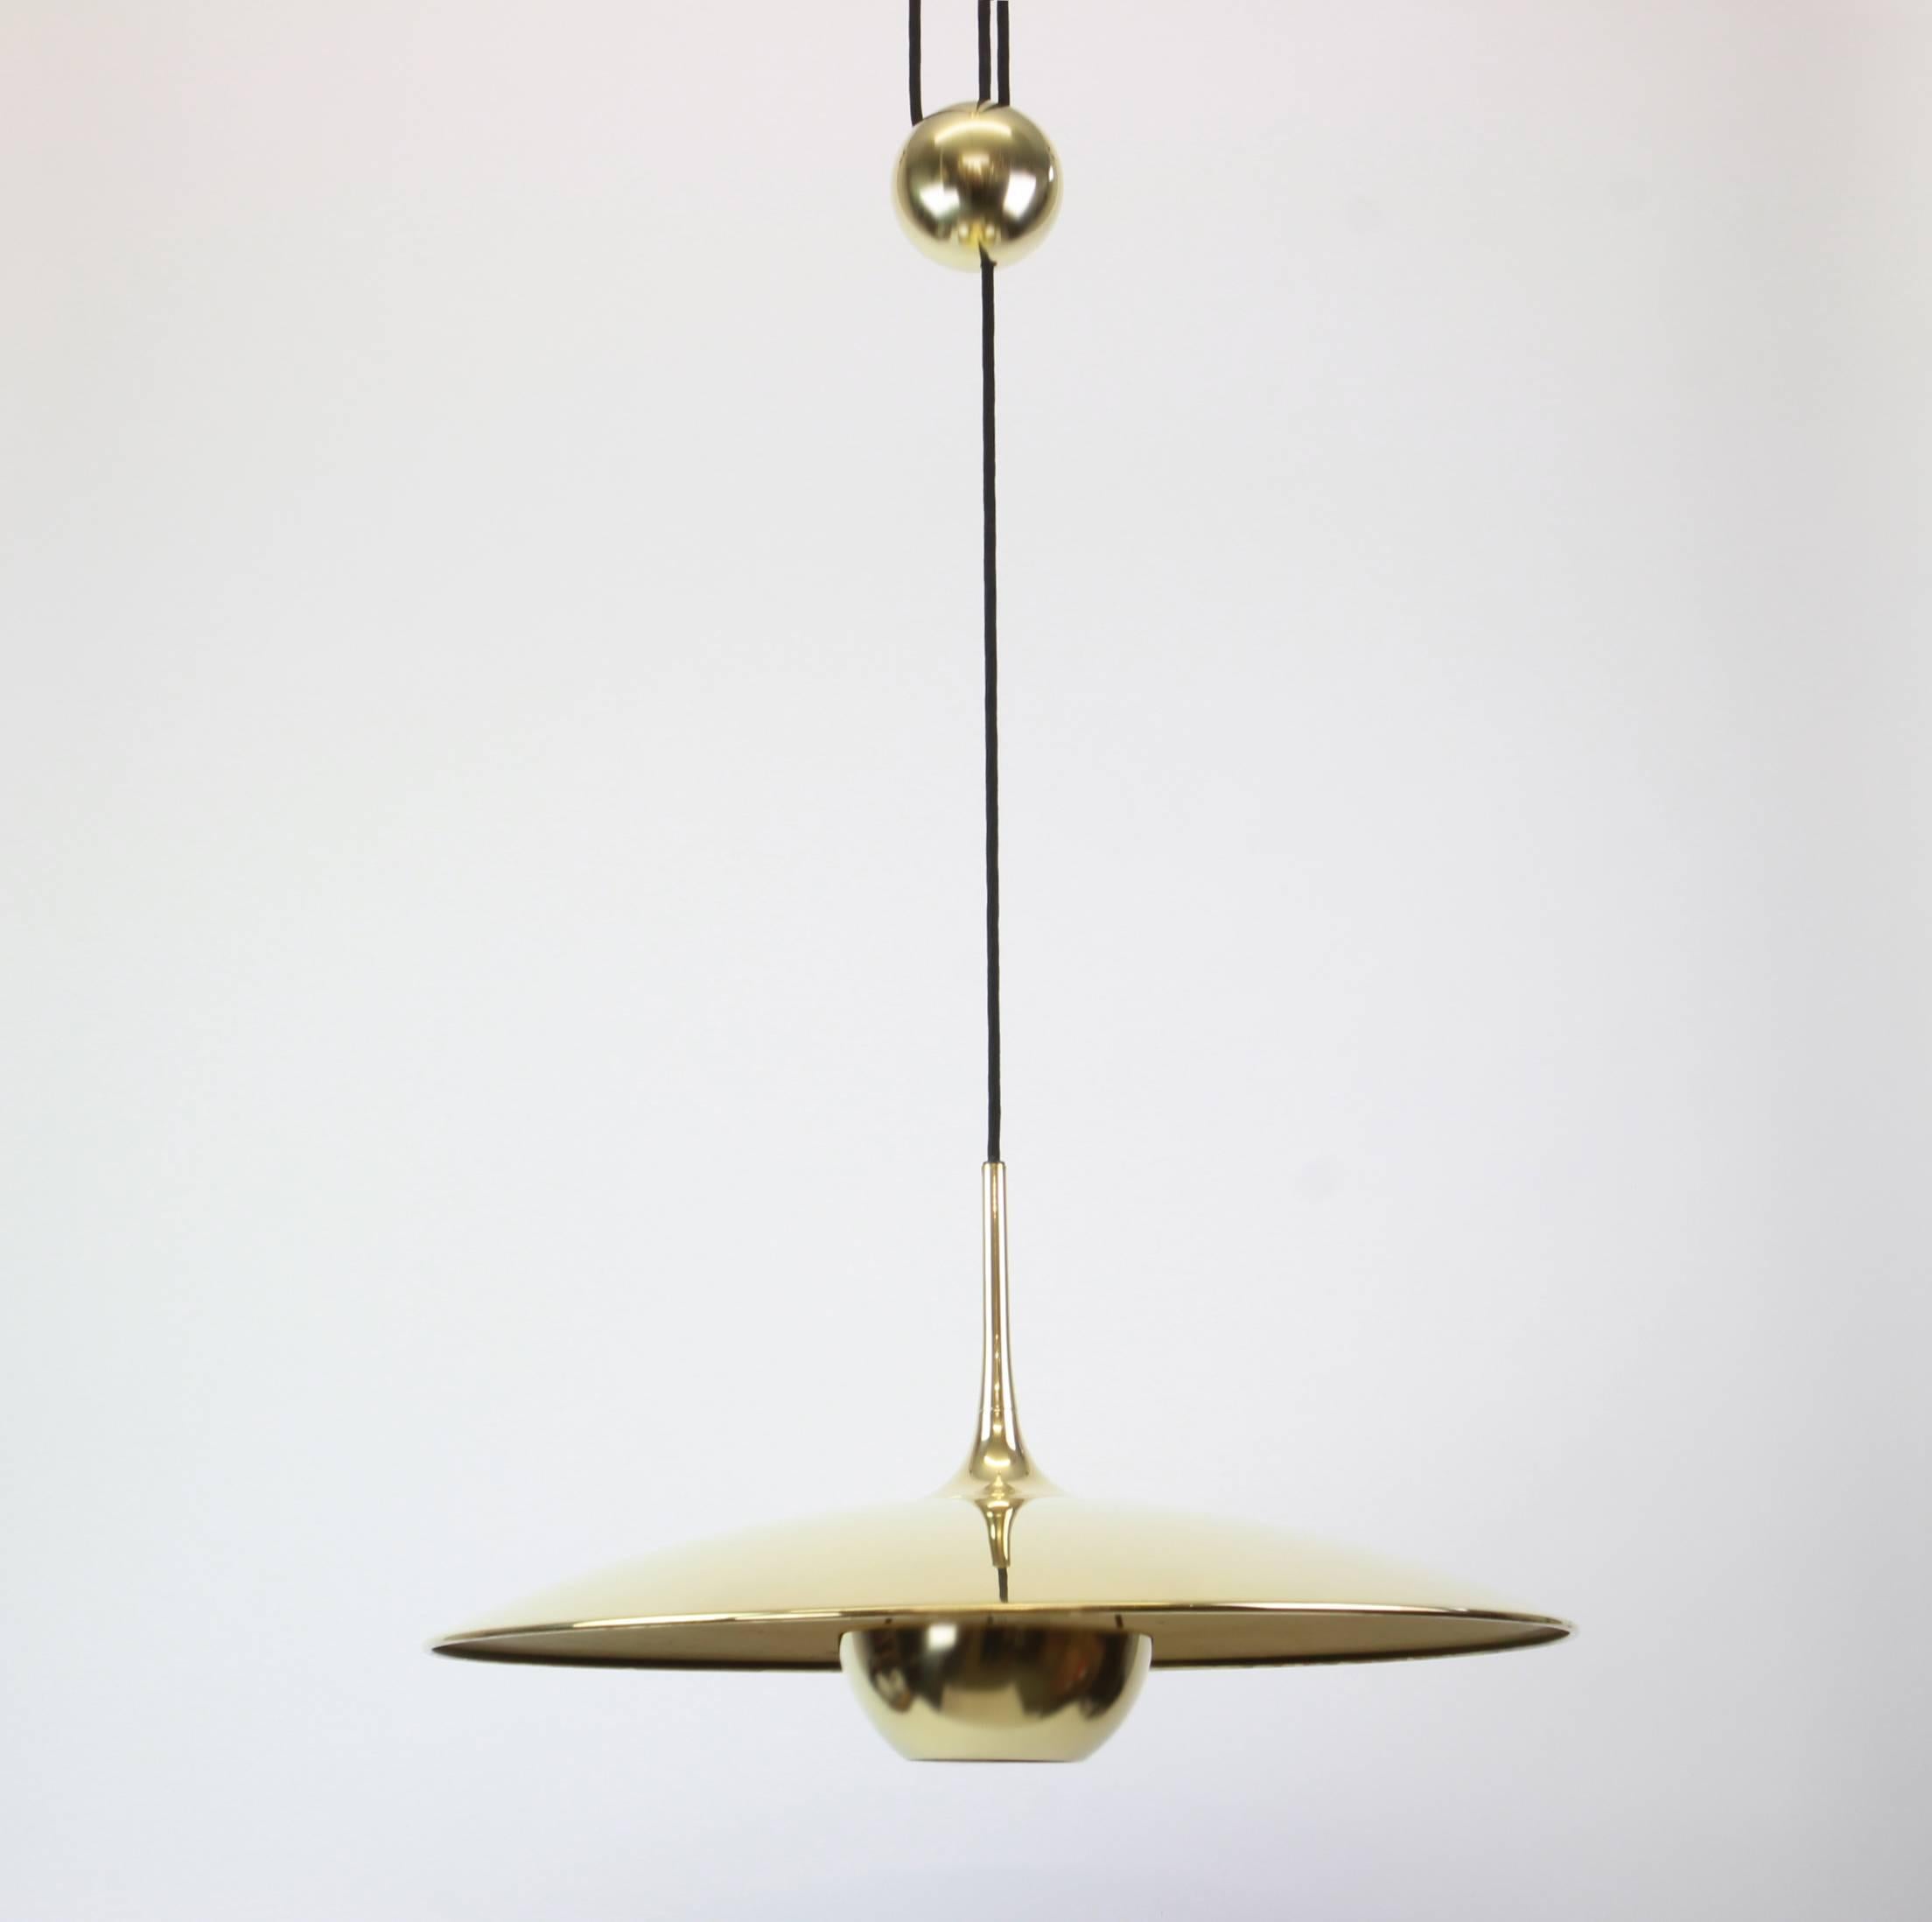 Brass counter balance pendant by German lighting designed by Florian Schulz. Heavy brass ball counter-weight and brass disc. Cloth cord. 

 Excellent vintage condition. Height is adjustable.

Sockets: 1 x E26/E27 standard bulb 

Dimensions: